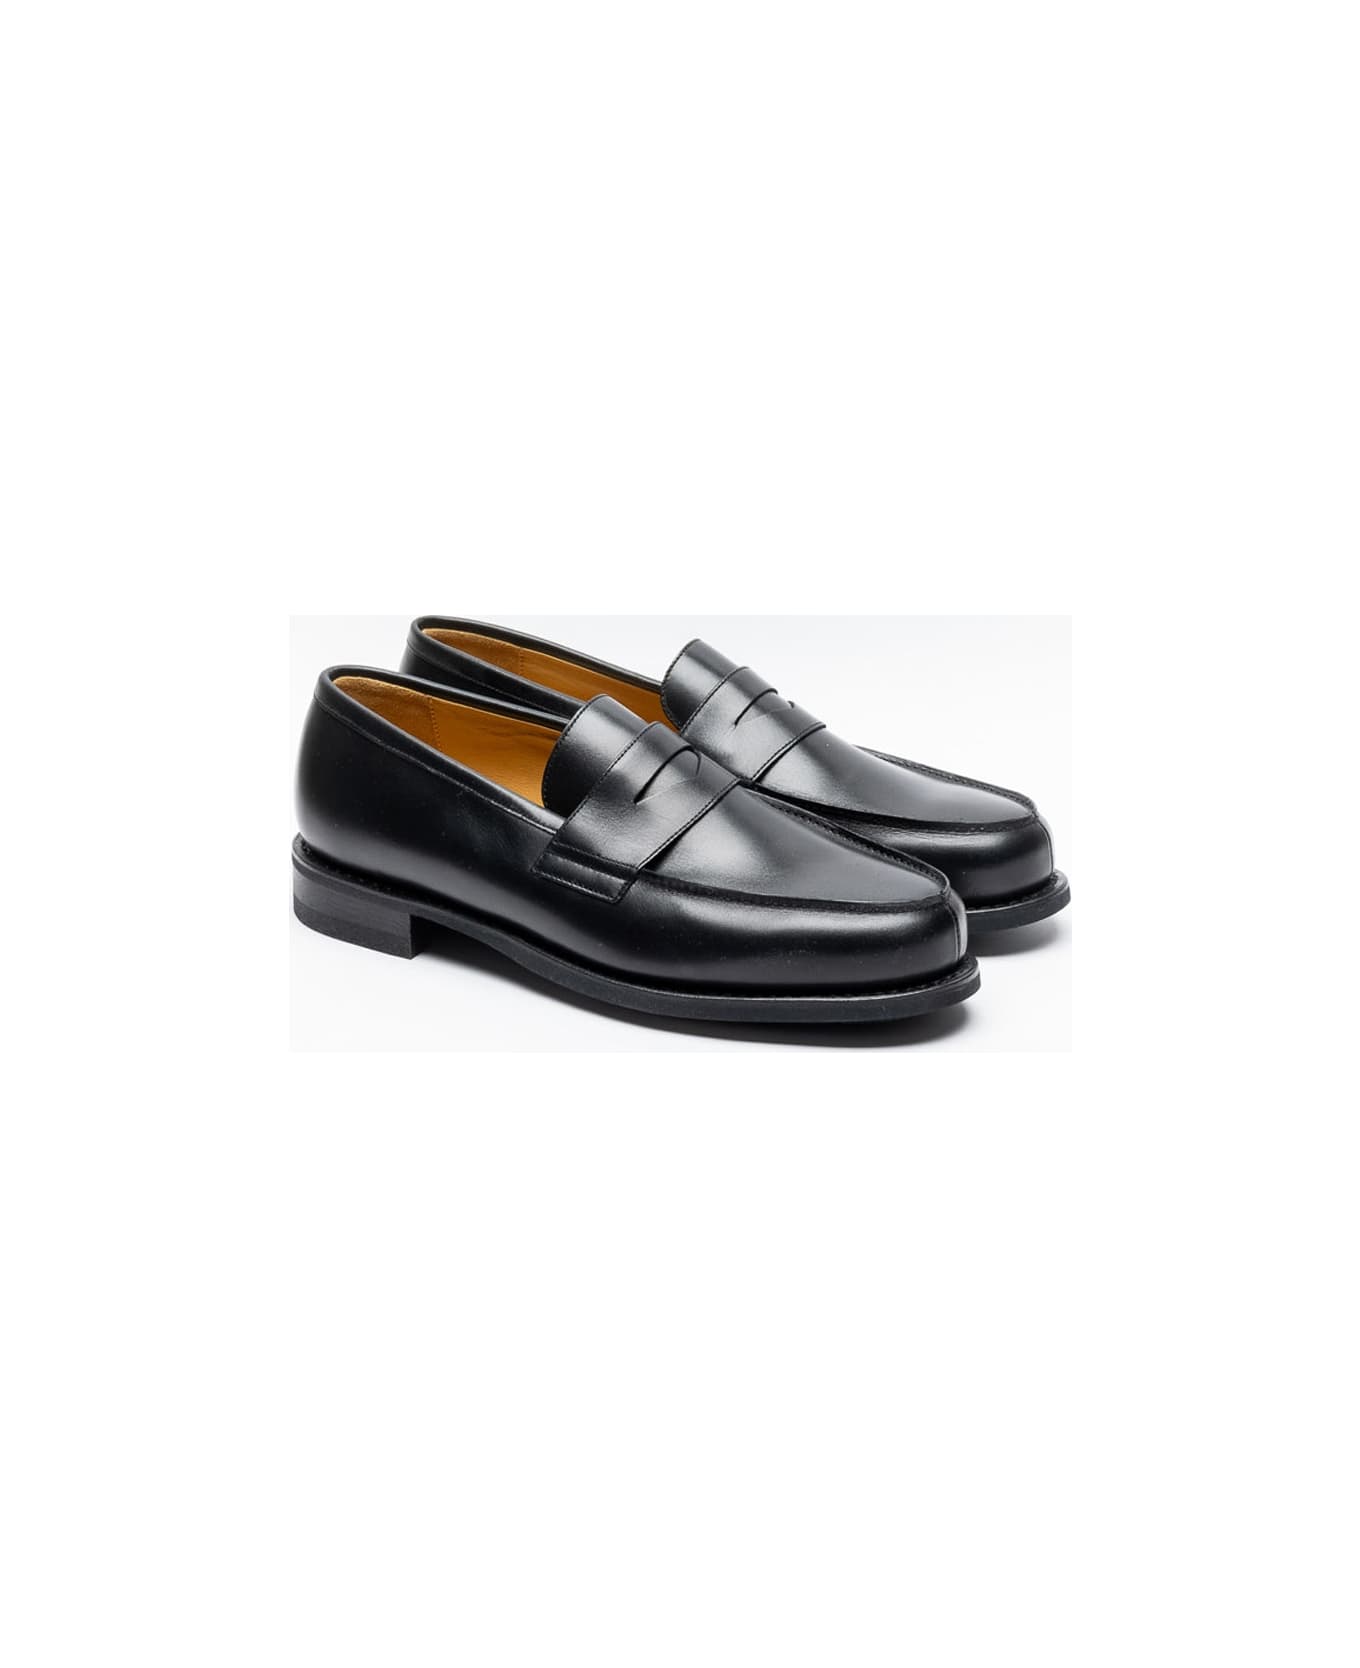 Paraboot Black Calf Penny Loafer - Nero